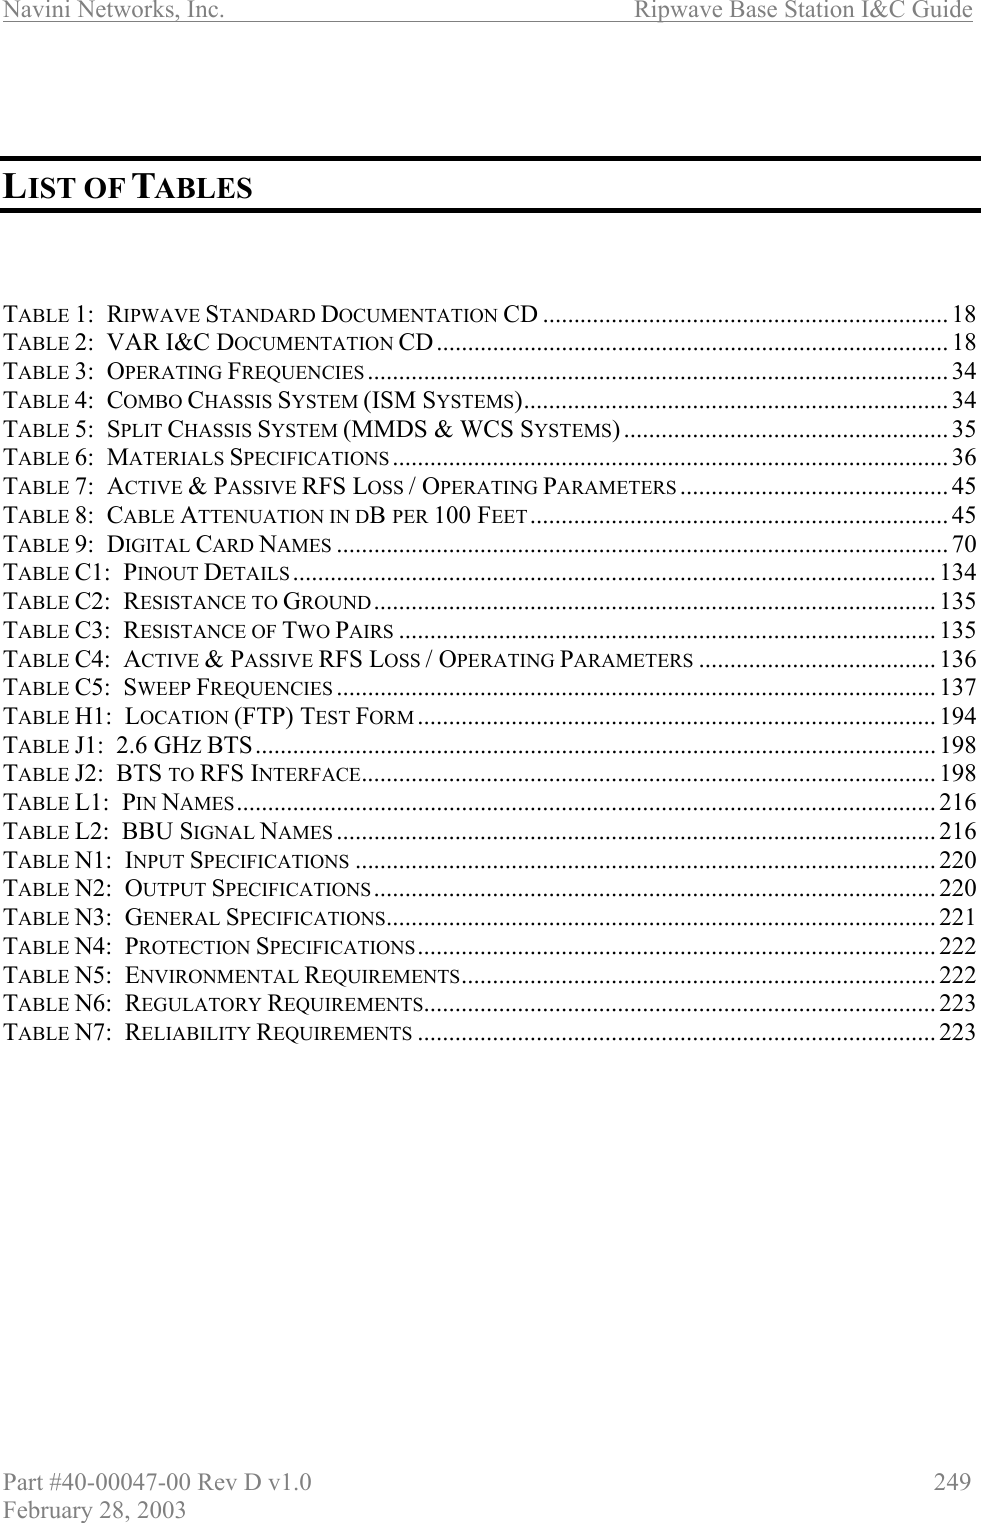 Navini Networks, Inc.                          Ripwave Base Station I&amp;C Guide Part #40-00047-00 Rev D v1.0                     249 February 28, 2003    LIST OF TABLES    TABLE 1:  RIPWAVE STANDARD DOCUMENTATION CD ................................................................. 18 TABLE 2:  VAR I&amp;C DOCUMENTATION CD.................................................................................. 18 TABLE 3:  OPERATING FREQUENCIES ............................................................................................. 34 TABLE 4:  COMBO CHASSIS SYSTEM (ISM SYSTEMS).................................................................... 34 TABLE 5:  SPLIT CHASSIS SYSTEM (MMDS &amp; WCS SYSTEMS) .................................................... 35 TABLE 6:  MATERIALS SPECIFICATIONS ......................................................................................... 36 TABLE 7:  ACTIVE &amp; PASSIVE RFS LOSS / OPERATING PARAMETERS ........................................... 45 TABLE 8:  CABLE ATTENUATION IN DB PER 100 FEET ................................................................... 45 TABLE 9:  DIGITAL CARD NAMES .................................................................................................. 70 TABLE C1:  PINOUT DETAILS ....................................................................................................... 134 TABLE C2:  RESISTANCE TO GROUND .......................................................................................... 135 TABLE C3:  RESISTANCE OF TWO PAIRS ...................................................................................... 135 TABLE C4:  ACTIVE &amp; PASSIVE RFS LOSS / OPERATING PARAMETERS ...................................... 136 TABLE C5:  SWEEP FREQUENCIES ................................................................................................ 137 TABLE H1:  LOCATION (FTP) TEST FORM ................................................................................... 194 TABLE J1:  2.6 GHZ BTS............................................................................................................. 198 TABLE J2:  BTS TO RFS INTERFACE............................................................................................ 198 TABLE L1:  PIN NAMES................................................................................................................ 216 TABLE L2:  BBU SIGNAL NAMES ................................................................................................ 216 TABLE N1:  INPUT SPECIFICATIONS ............................................................................................. 220 TABLE N2:  OUTPUT SPECIFICATIONS .......................................................................................... 220 TABLE N3:  GENERAL SPECIFICATIONS........................................................................................ 221 TABLE N4:  PROTECTION SPECIFICATIONS................................................................................... 222 TABLE N5:  ENVIRONMENTAL REQUIREMENTS............................................................................ 222 TABLE N6:  REGULATORY REQUIREMENTS.................................................................................. 223 TABLE N7:  RELIABILITY REQUIREMENTS ................................................................................... 223   